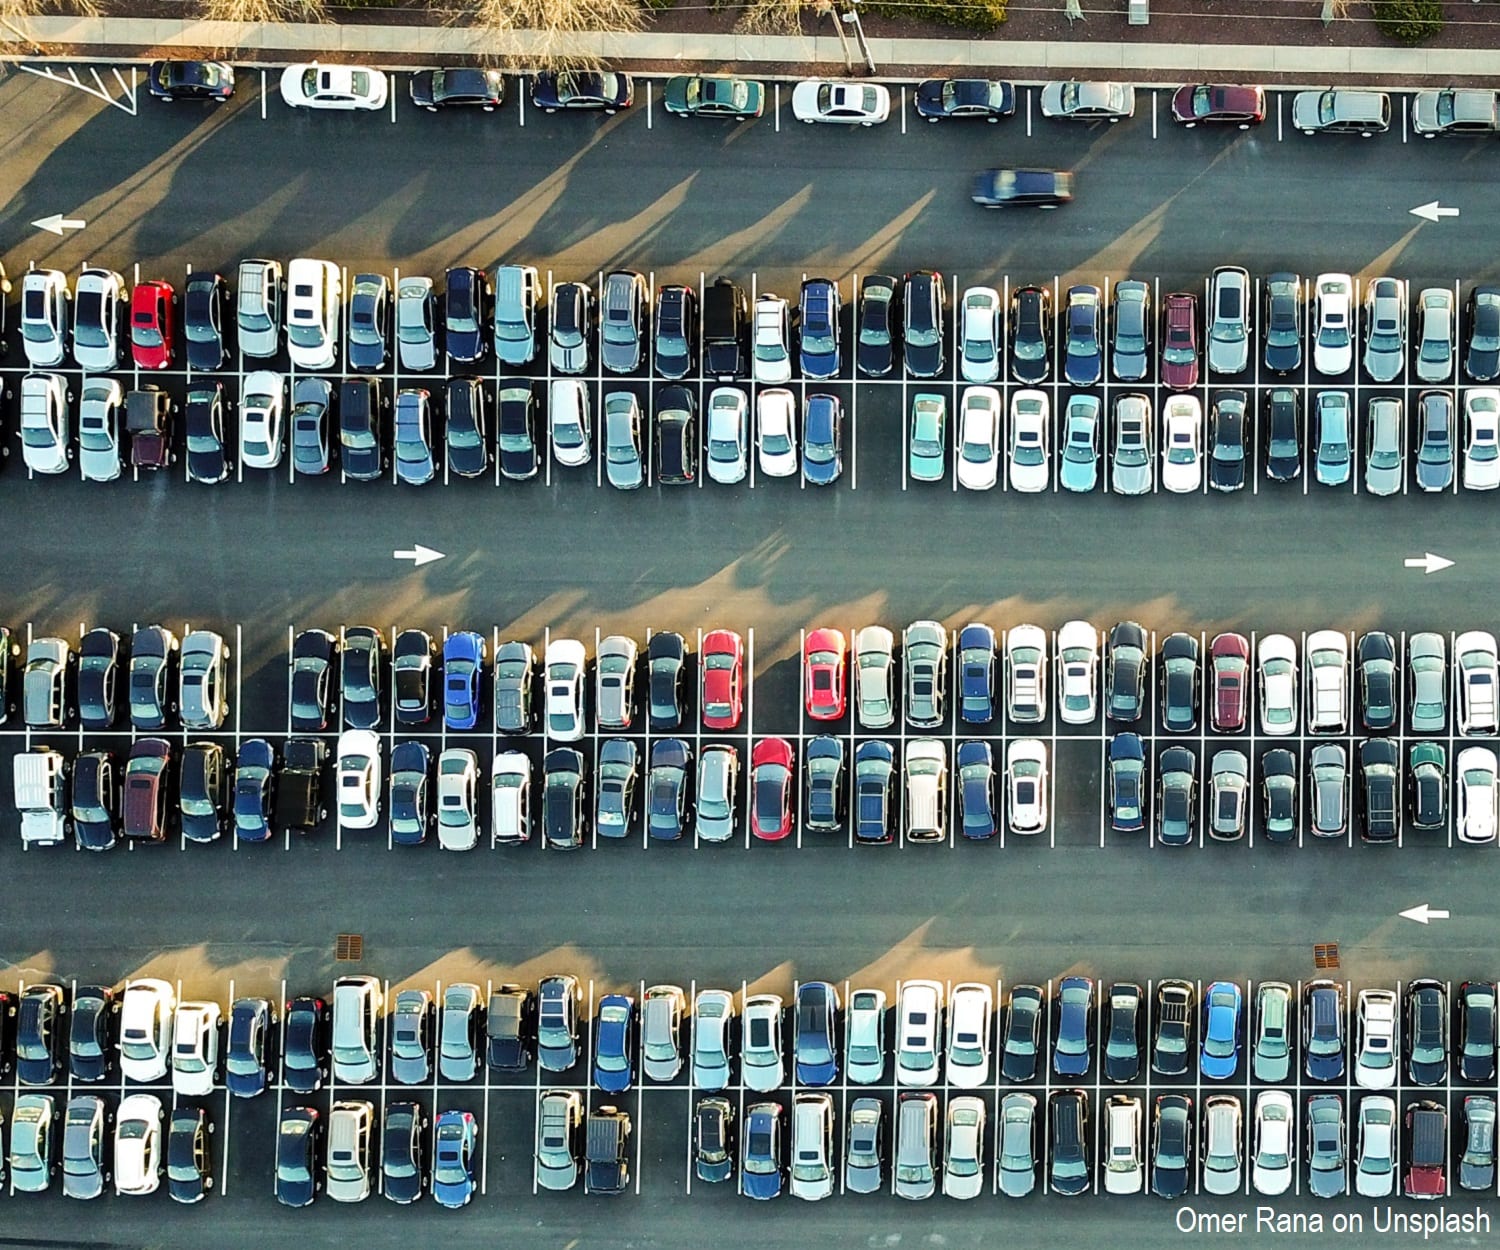 Parking lot full of cars shows Americans' dependence on car culture